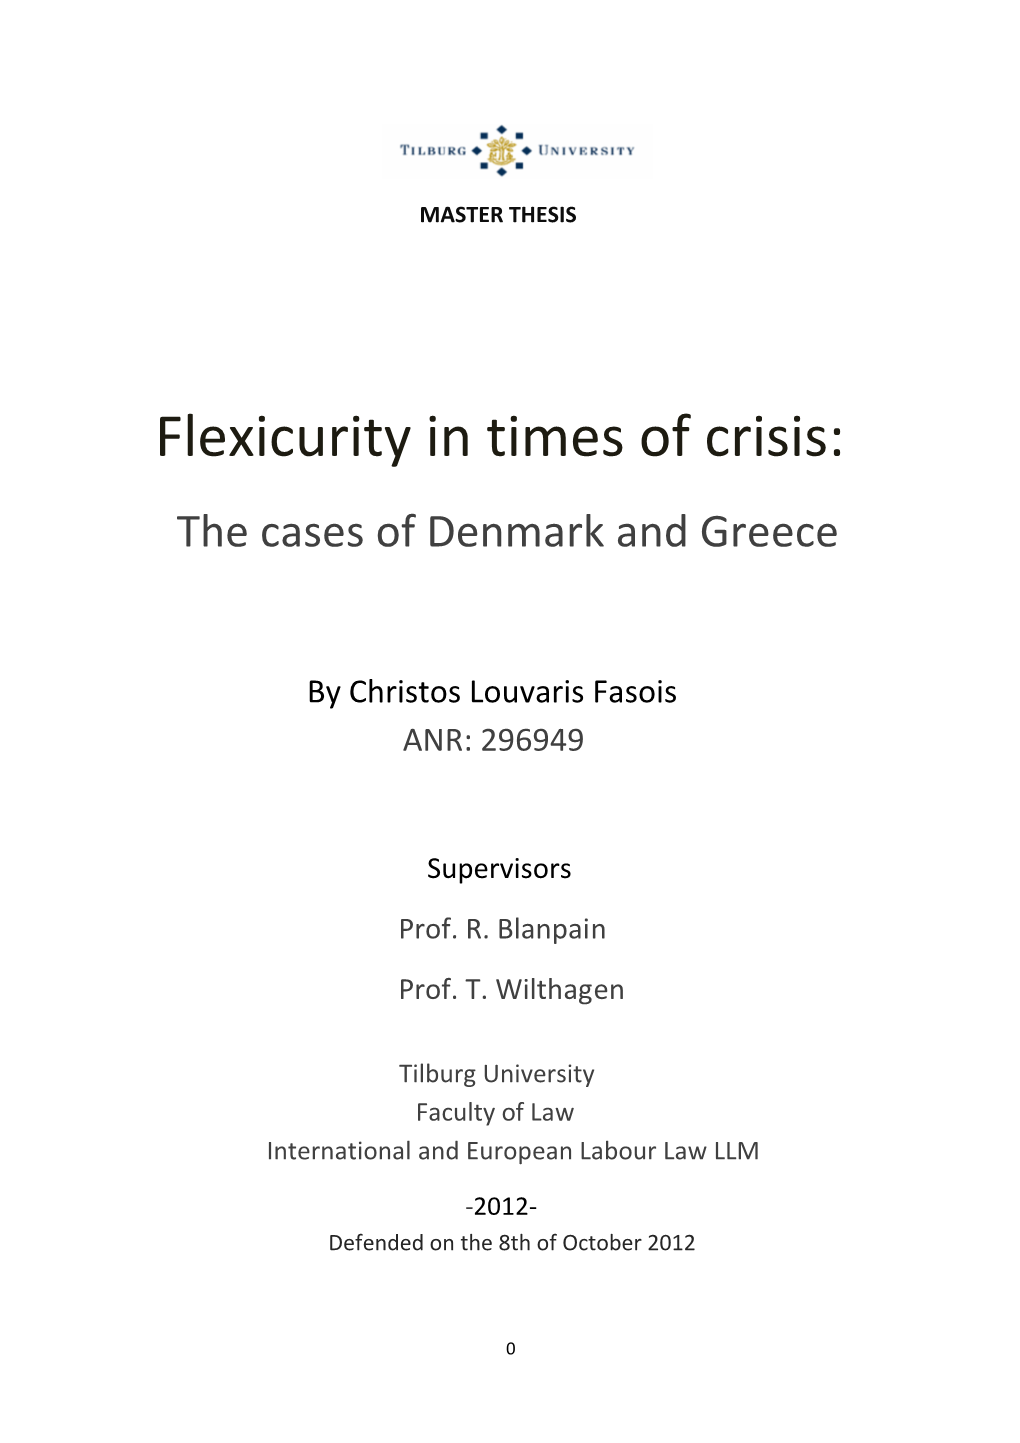 Flexicurity in Times of Crisis: the Cases of Denmark and Greece